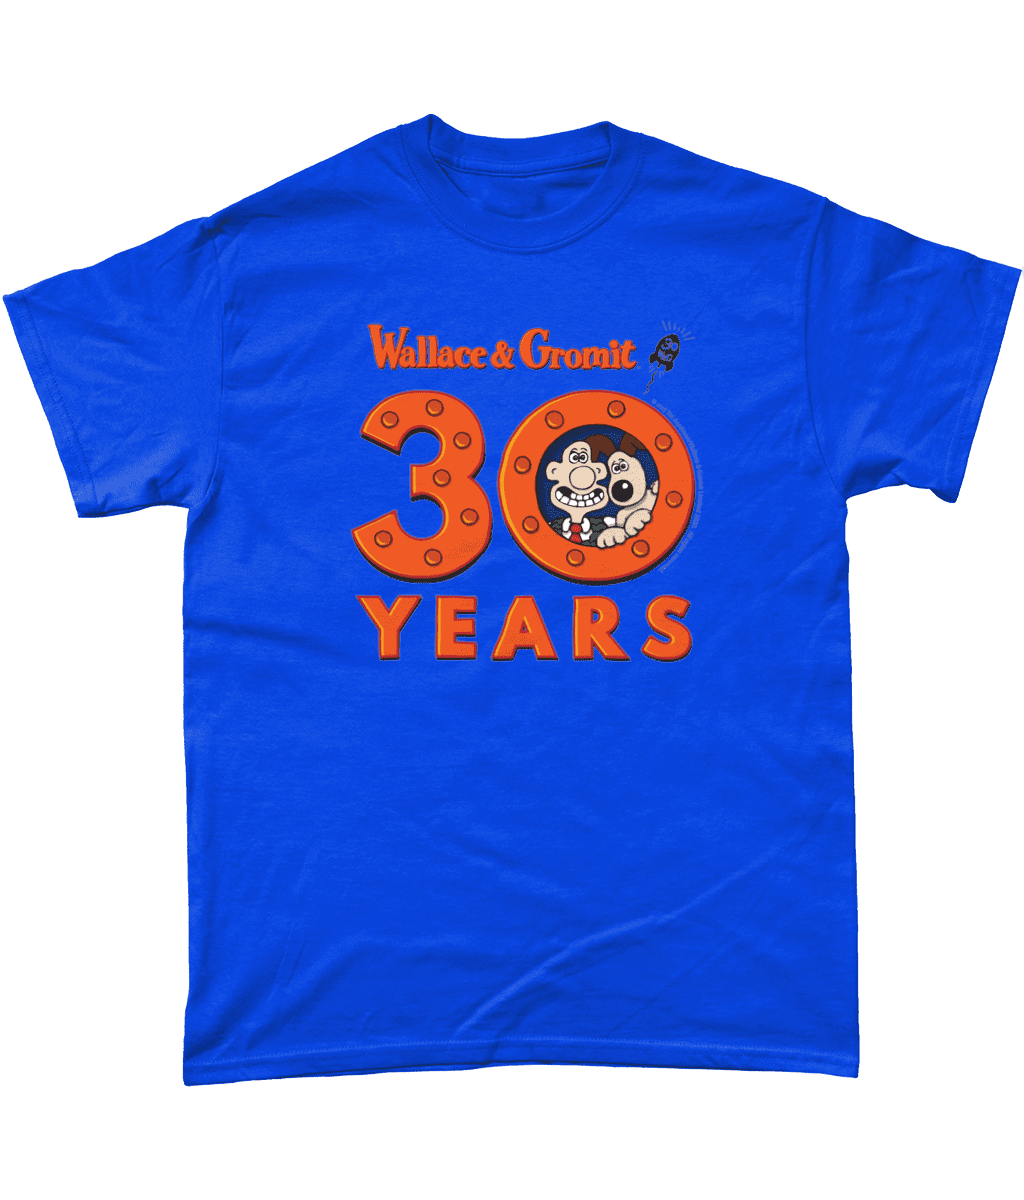 Wallace and Gromit 30 Years Rocket Men's T-Shirt Royal Blue